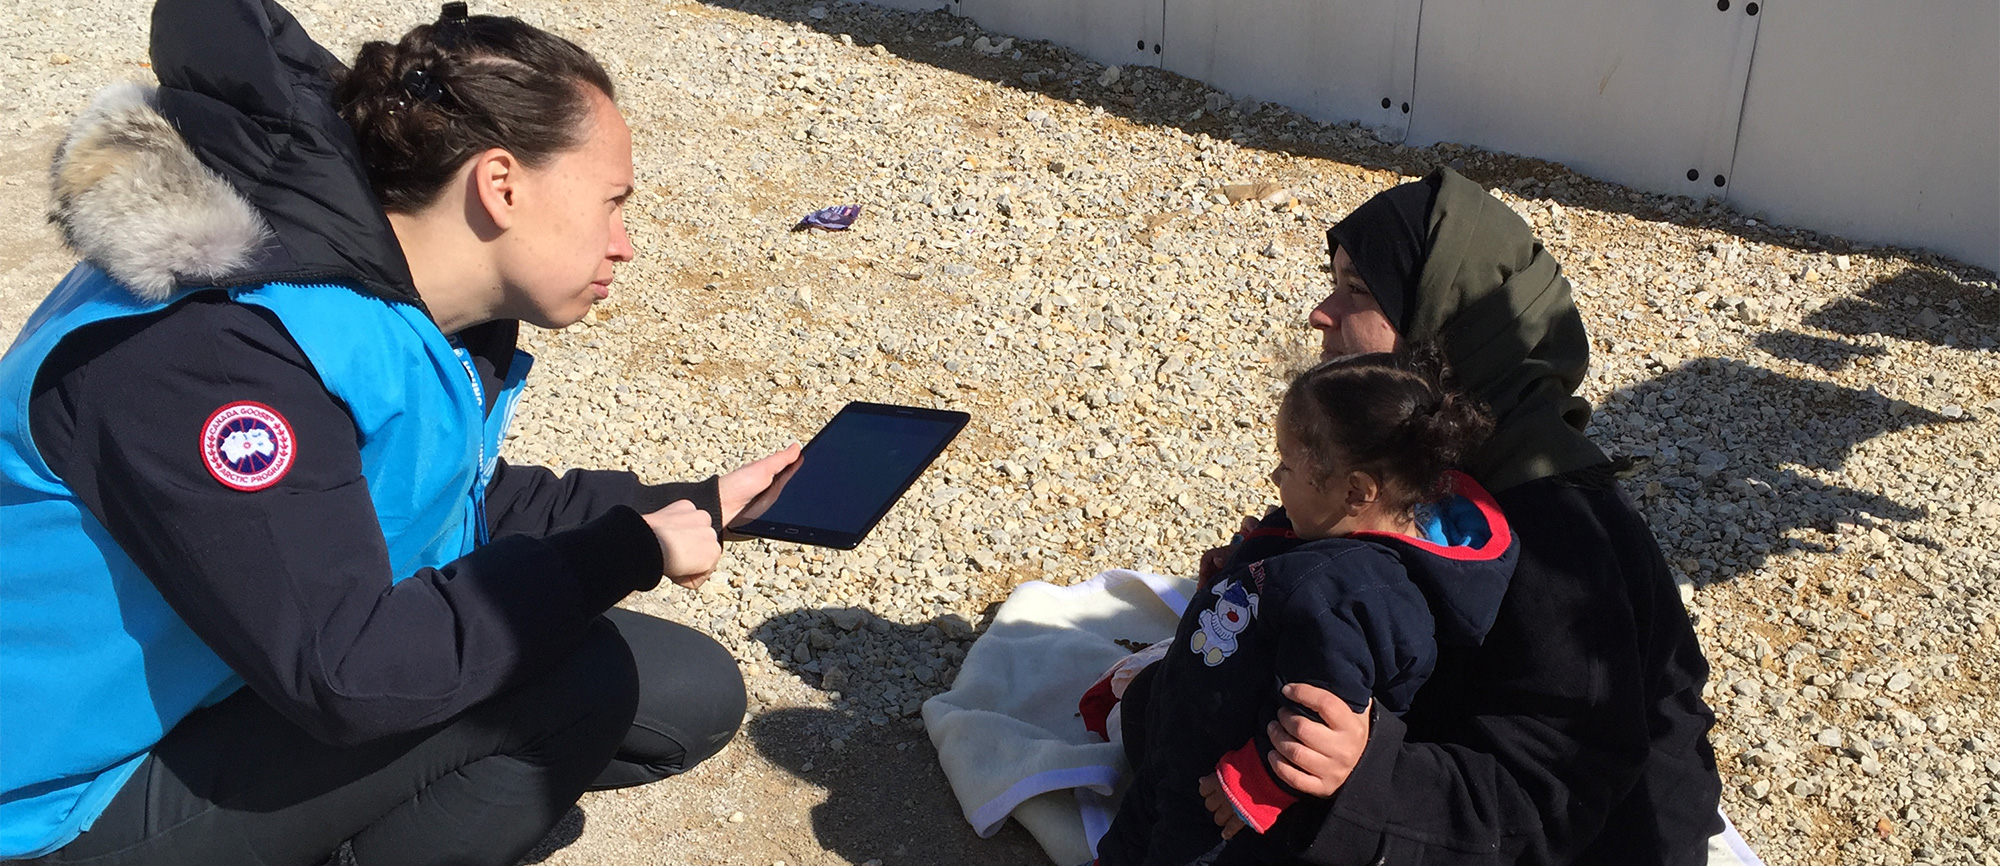 UNHCR's Emergency Lab Manager communicates with a young refugee in Macedonia.